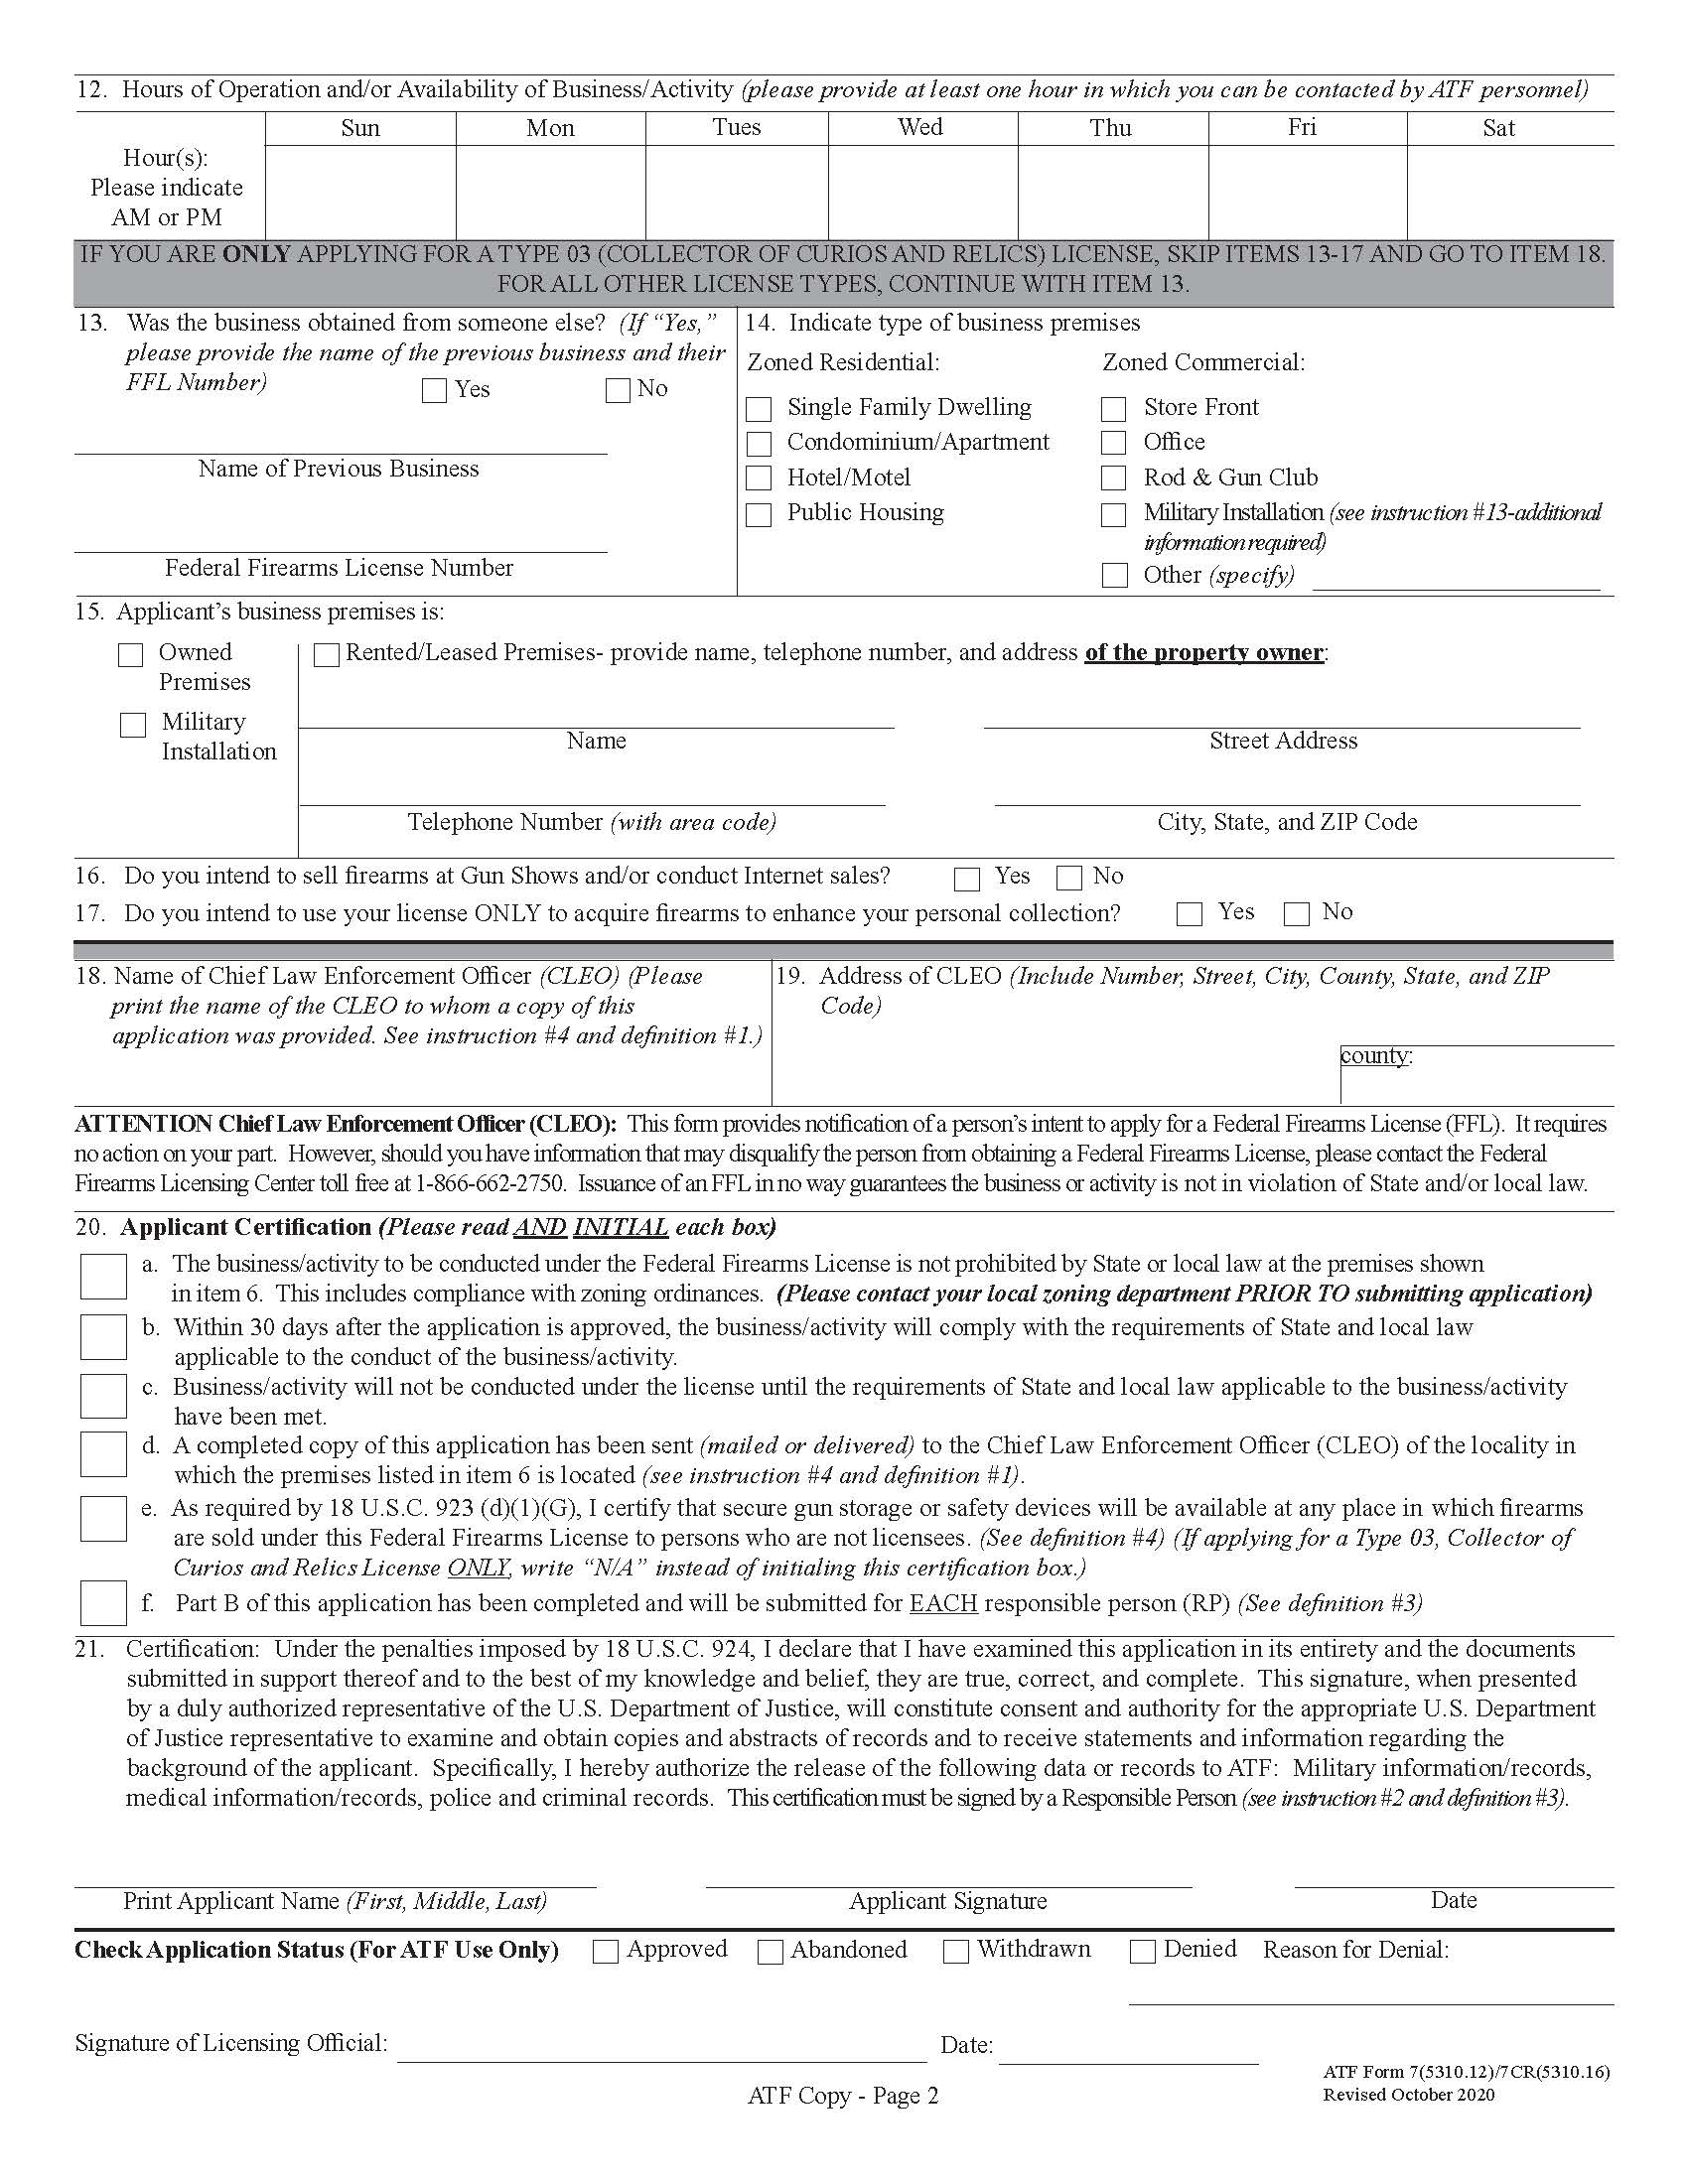 f_75310.12-7cr_5310.16_application_for_federal_firearms_license_0_0_Page_02.jpg